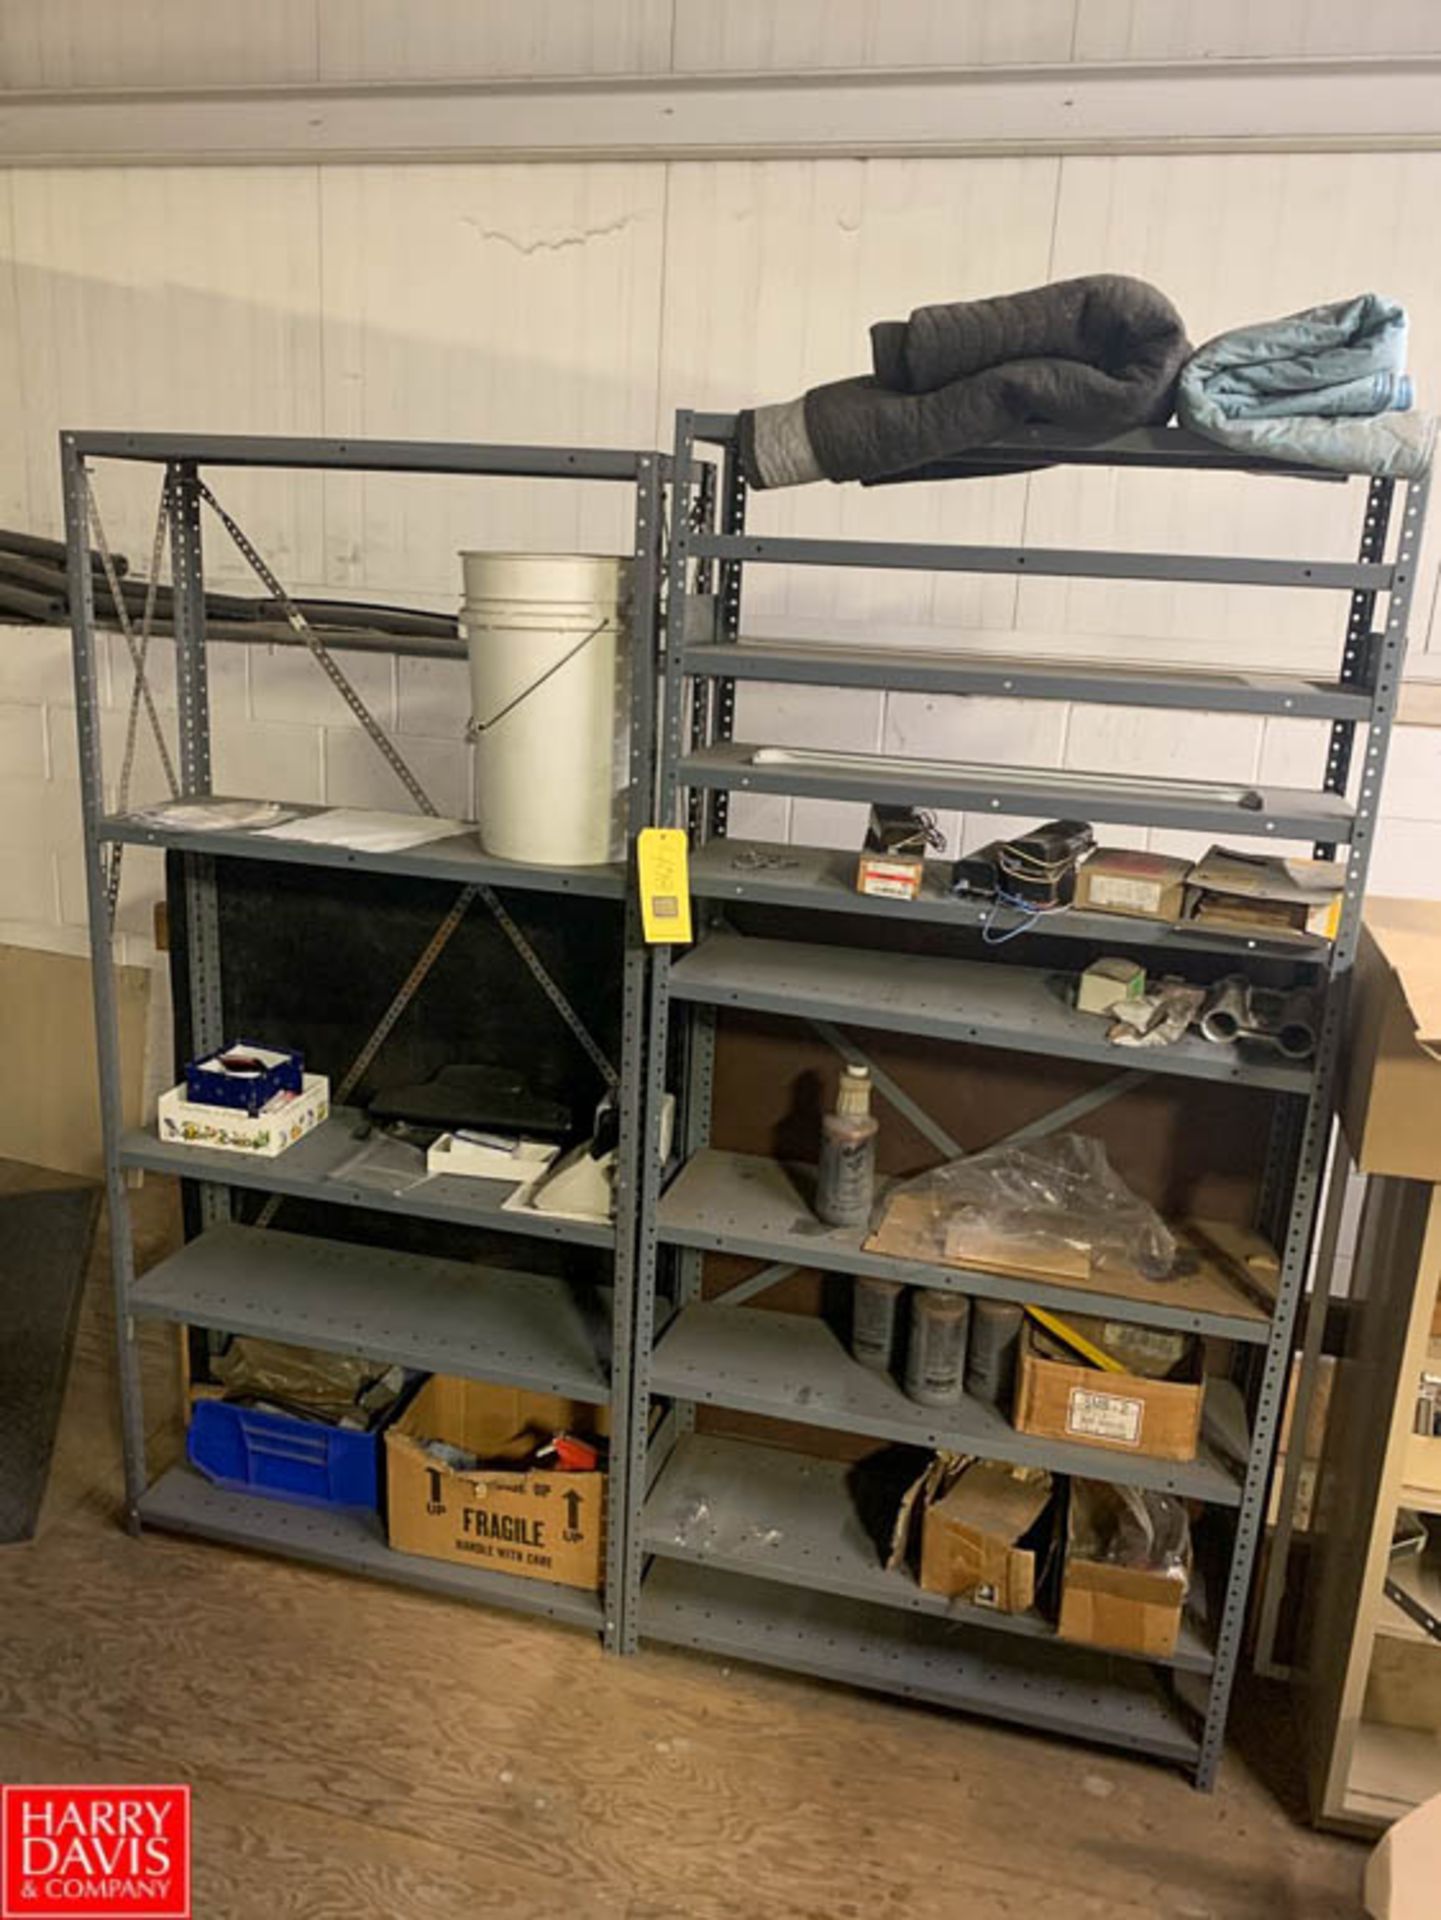 Shelving Units (No Contents) Rigging Fee: $160 ** , Removal will begin on March